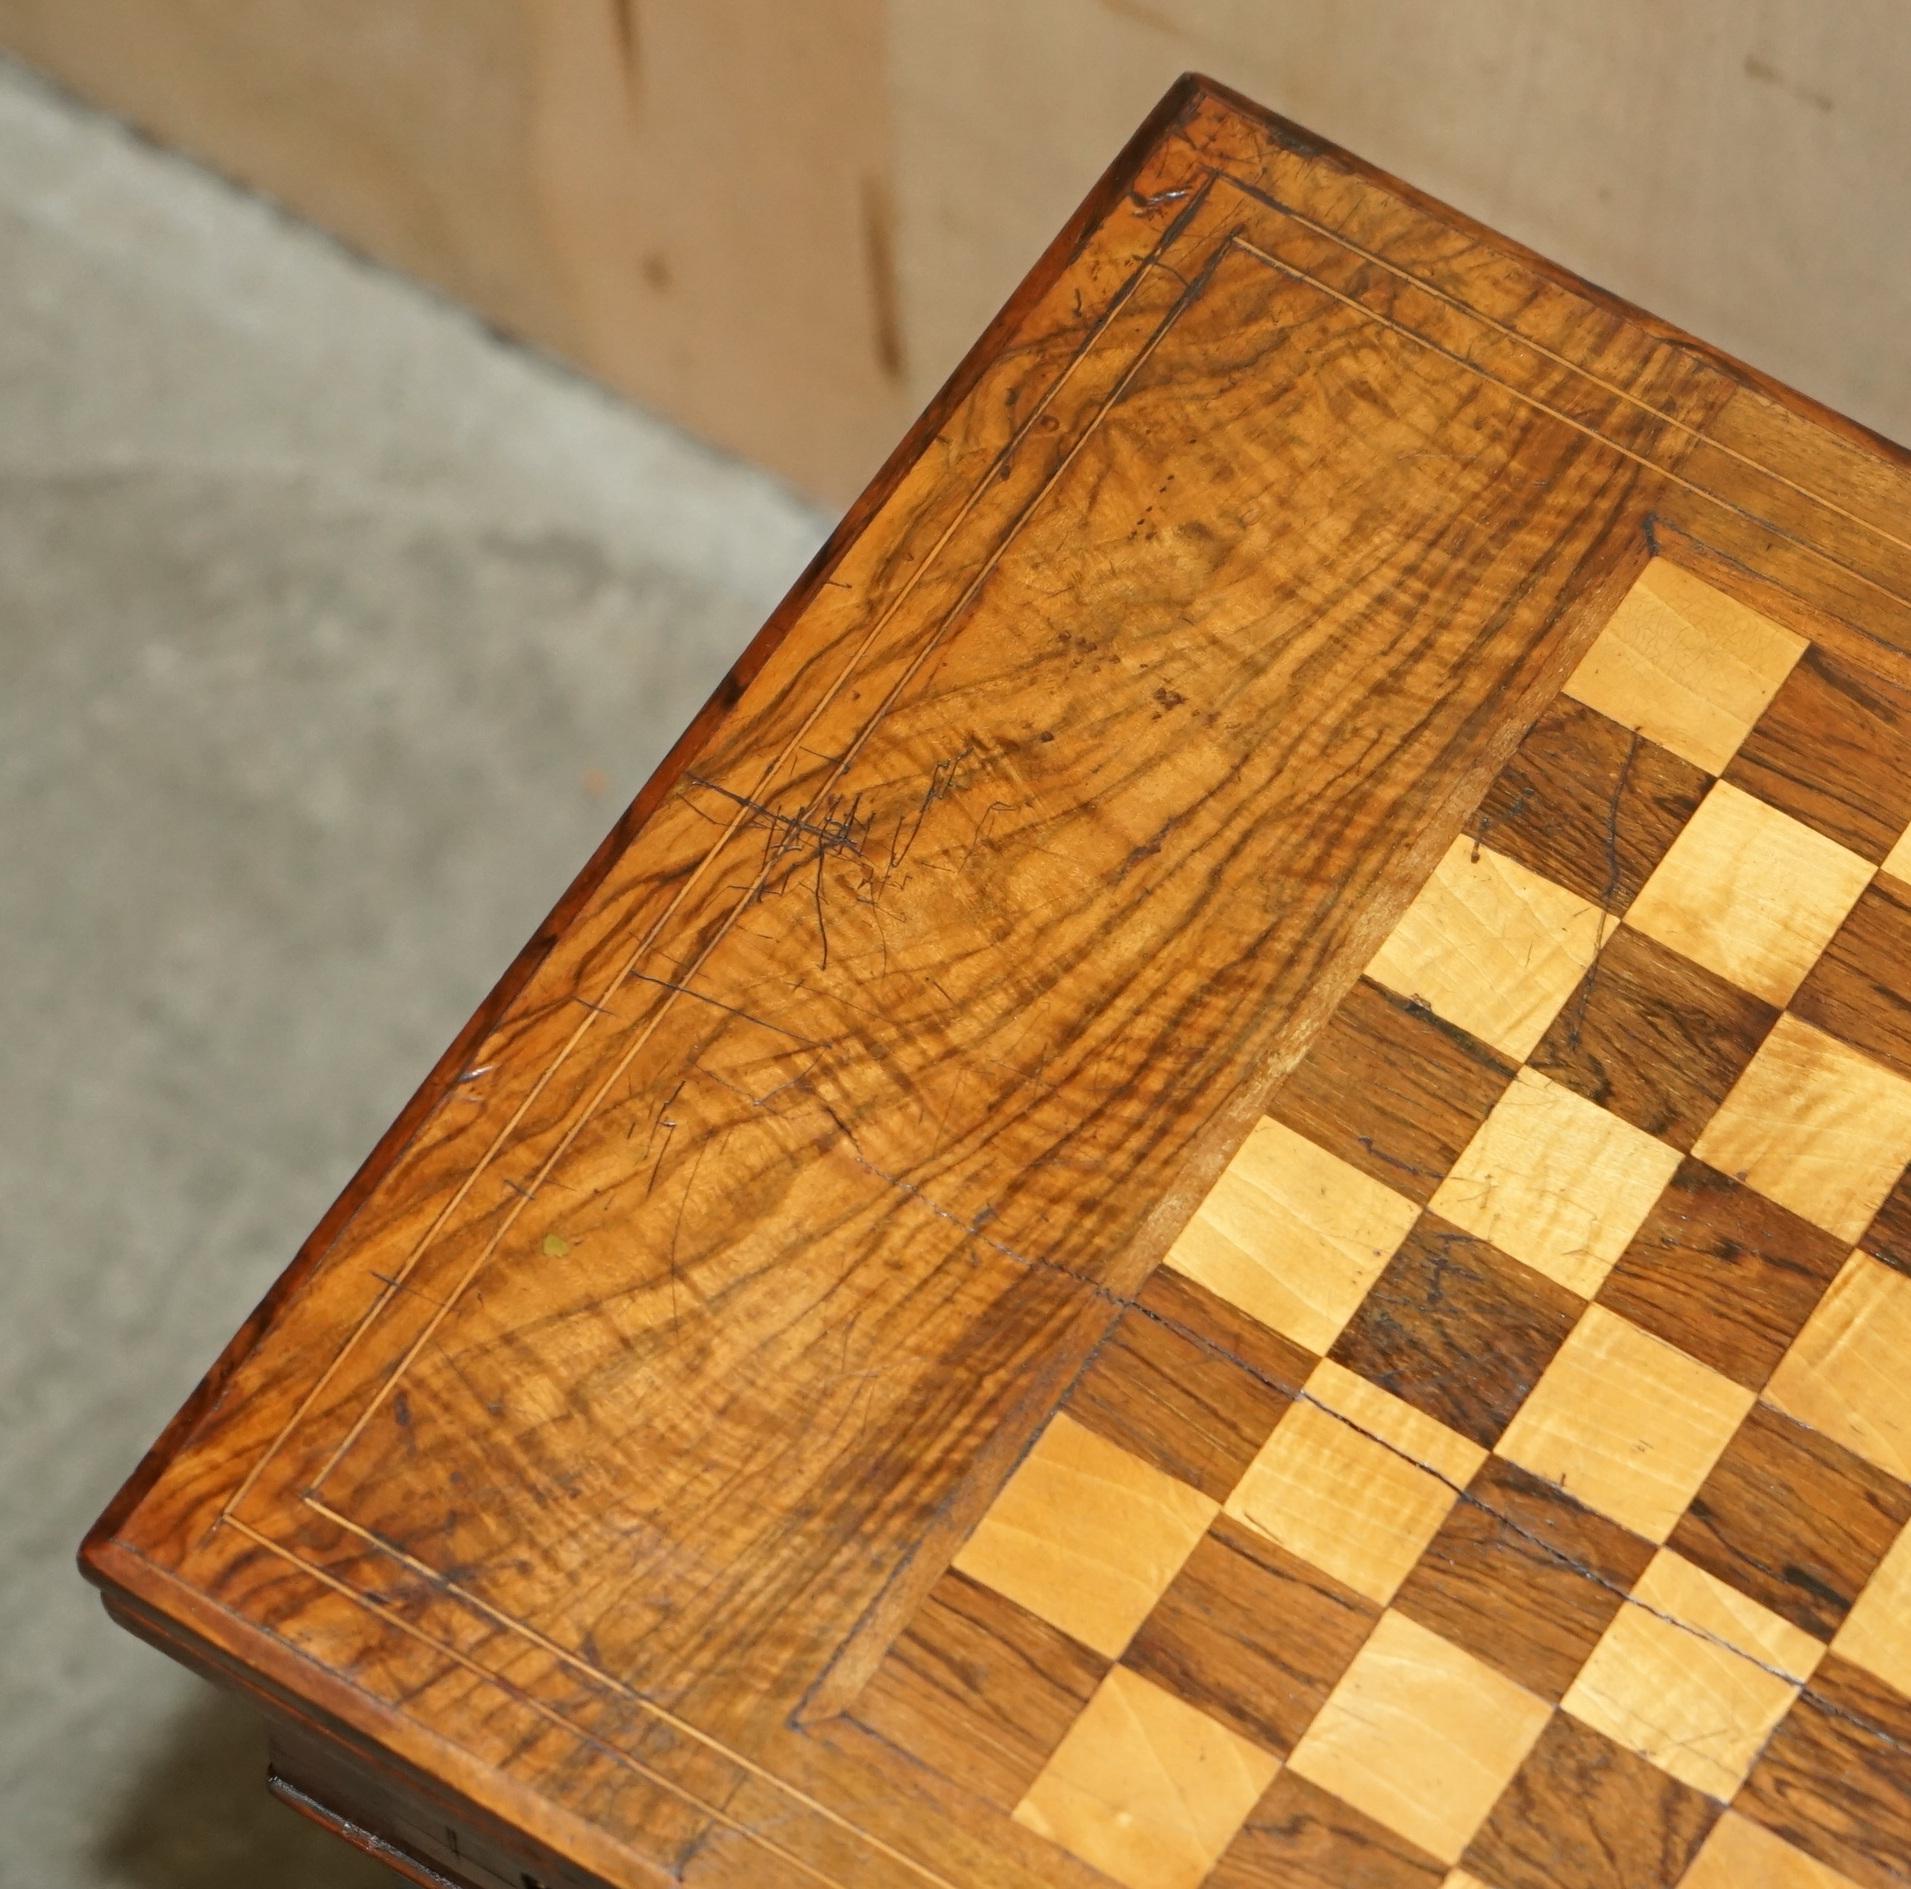 Mid-19th Century EXQUISITE WALNUT SATINWOOD & HARDWOOD ANTIQUE ViCTORIAN CHESSBOARD GAMES TABLE For Sale